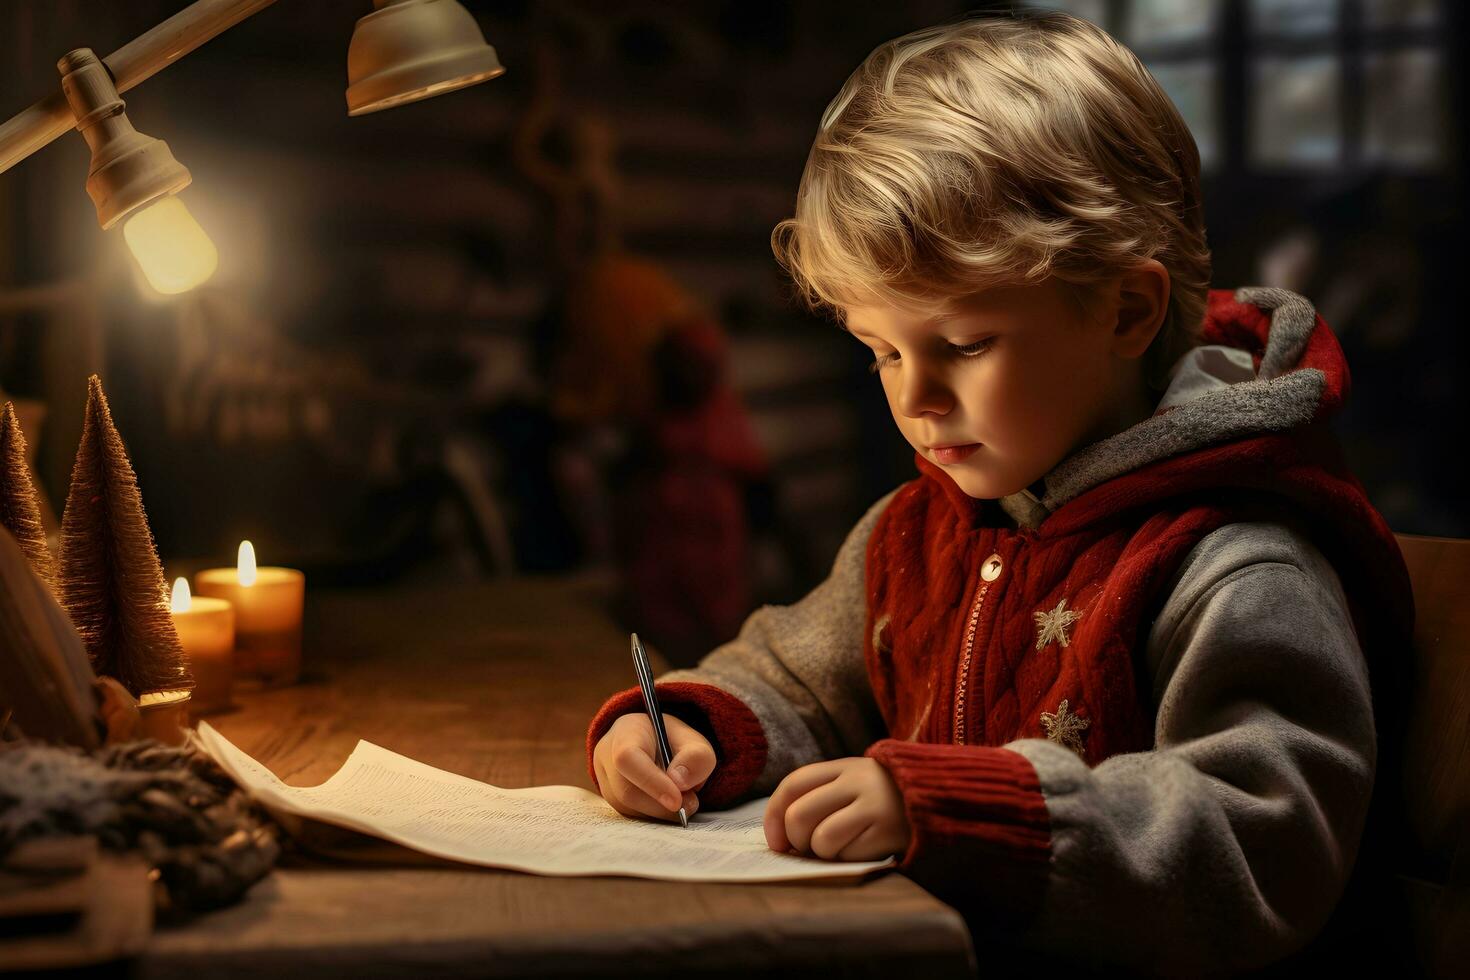 A little boy writing a letter to Santa Claus. Christmas wishes at cozy home interior. photo